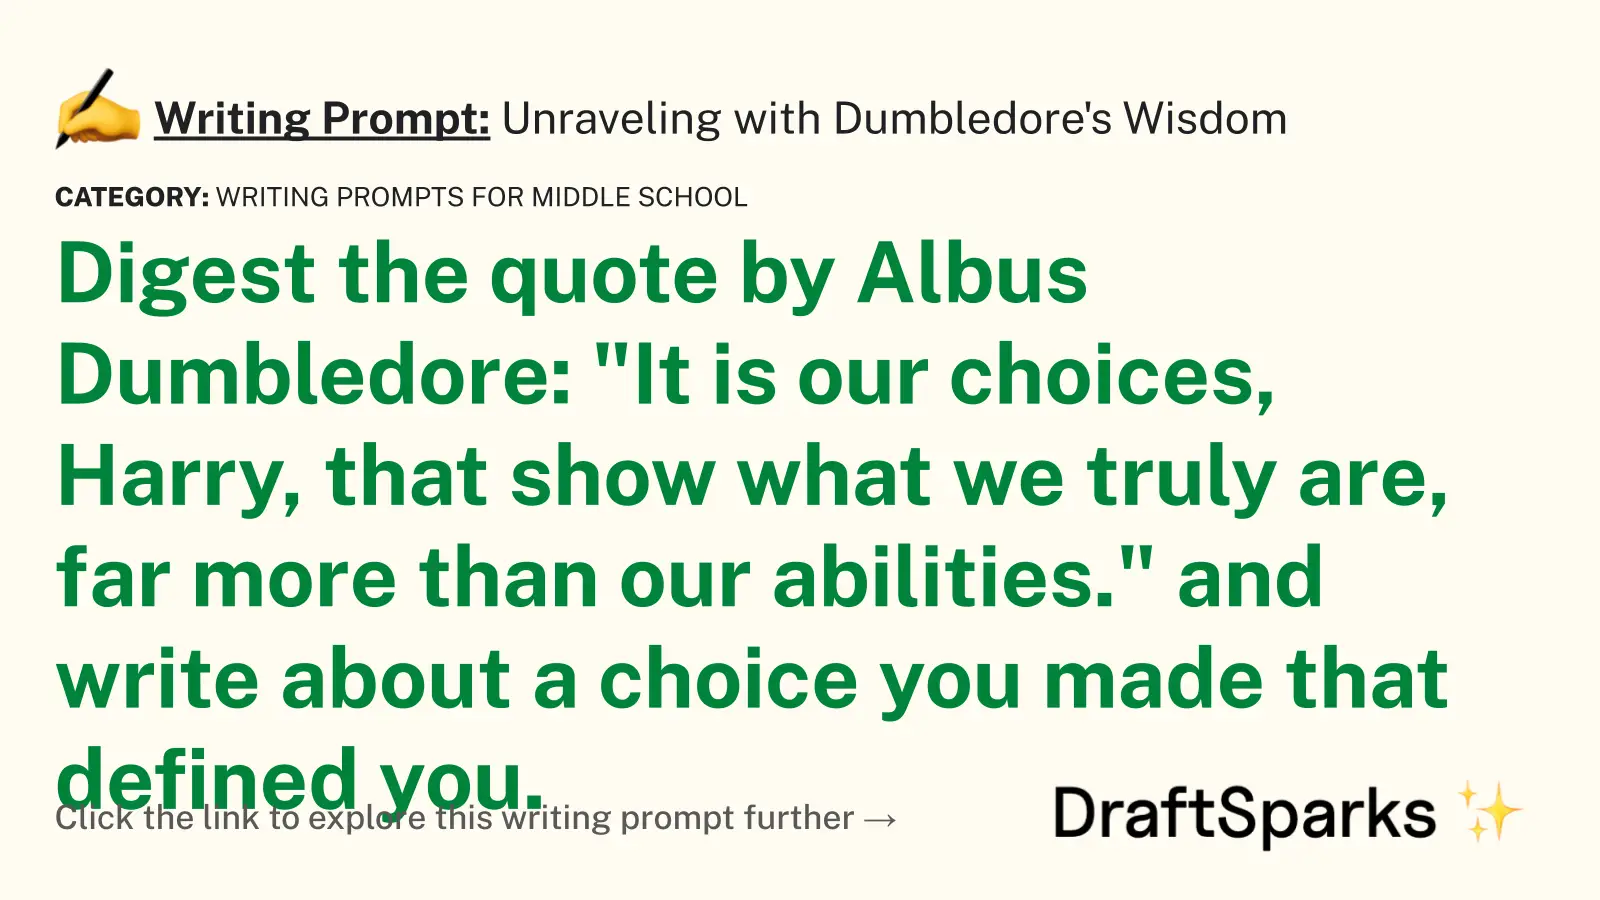 Unraveling with Dumbledore’s Wisdom